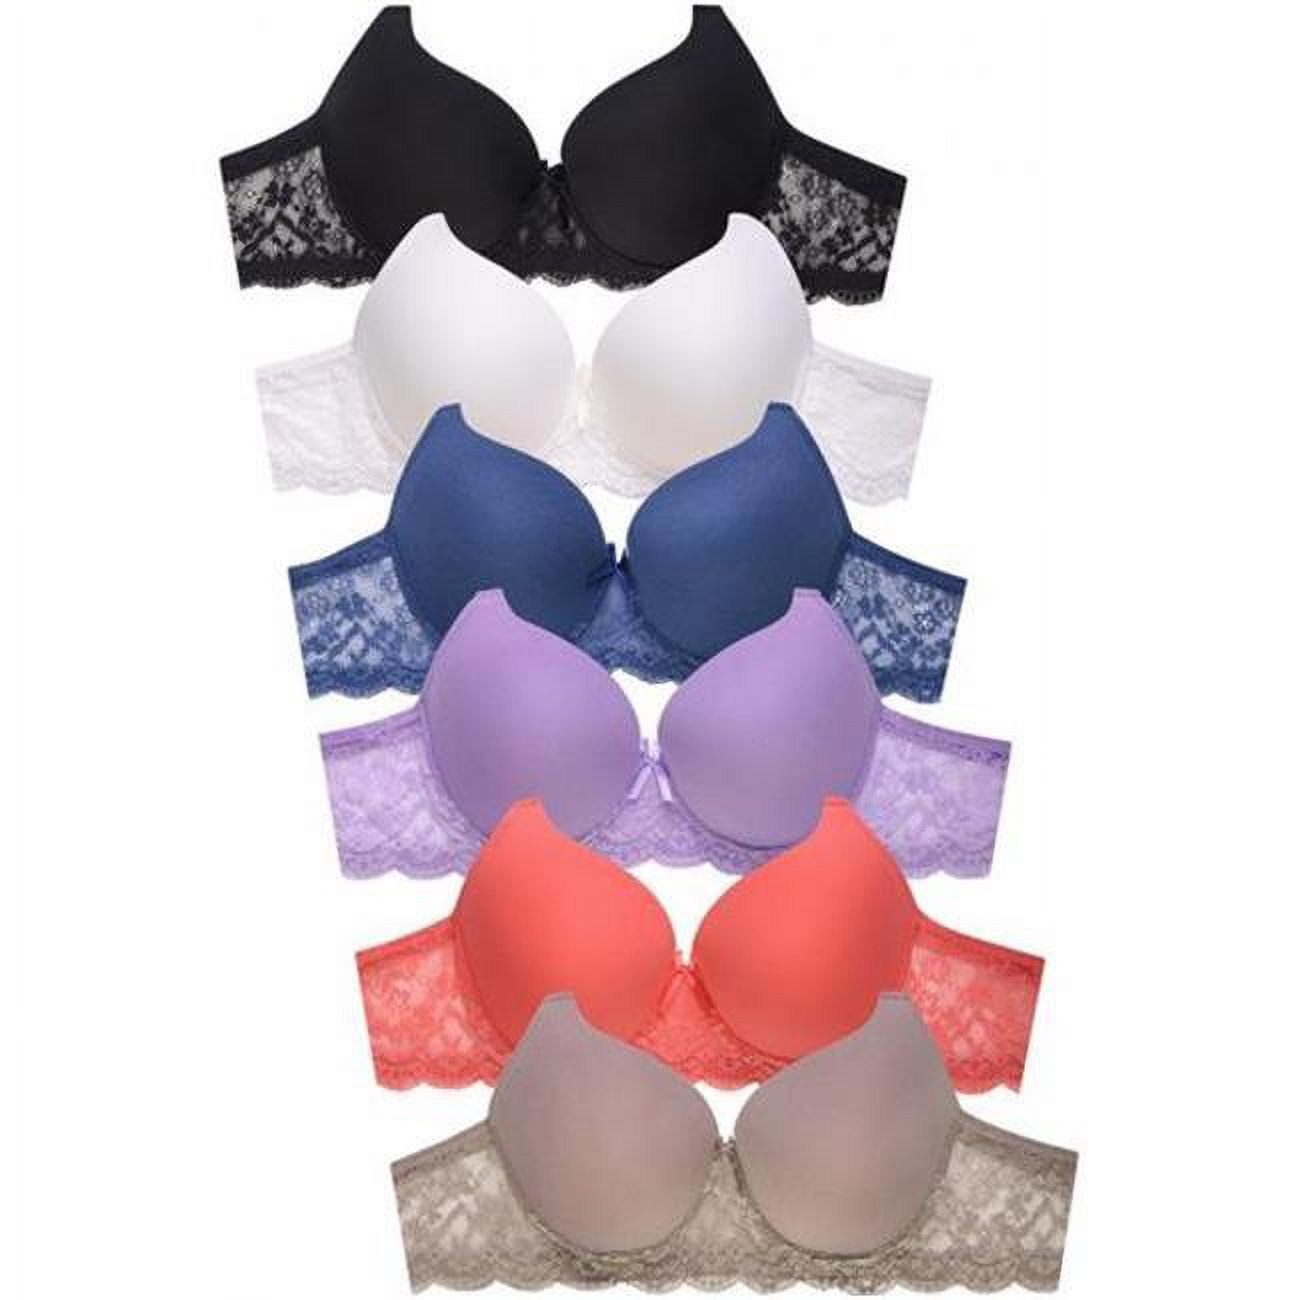 Mamia & Sofra IN-BR4430ND-40D D Cup Full Coverage Bra - Size 40 - Pack of 6  